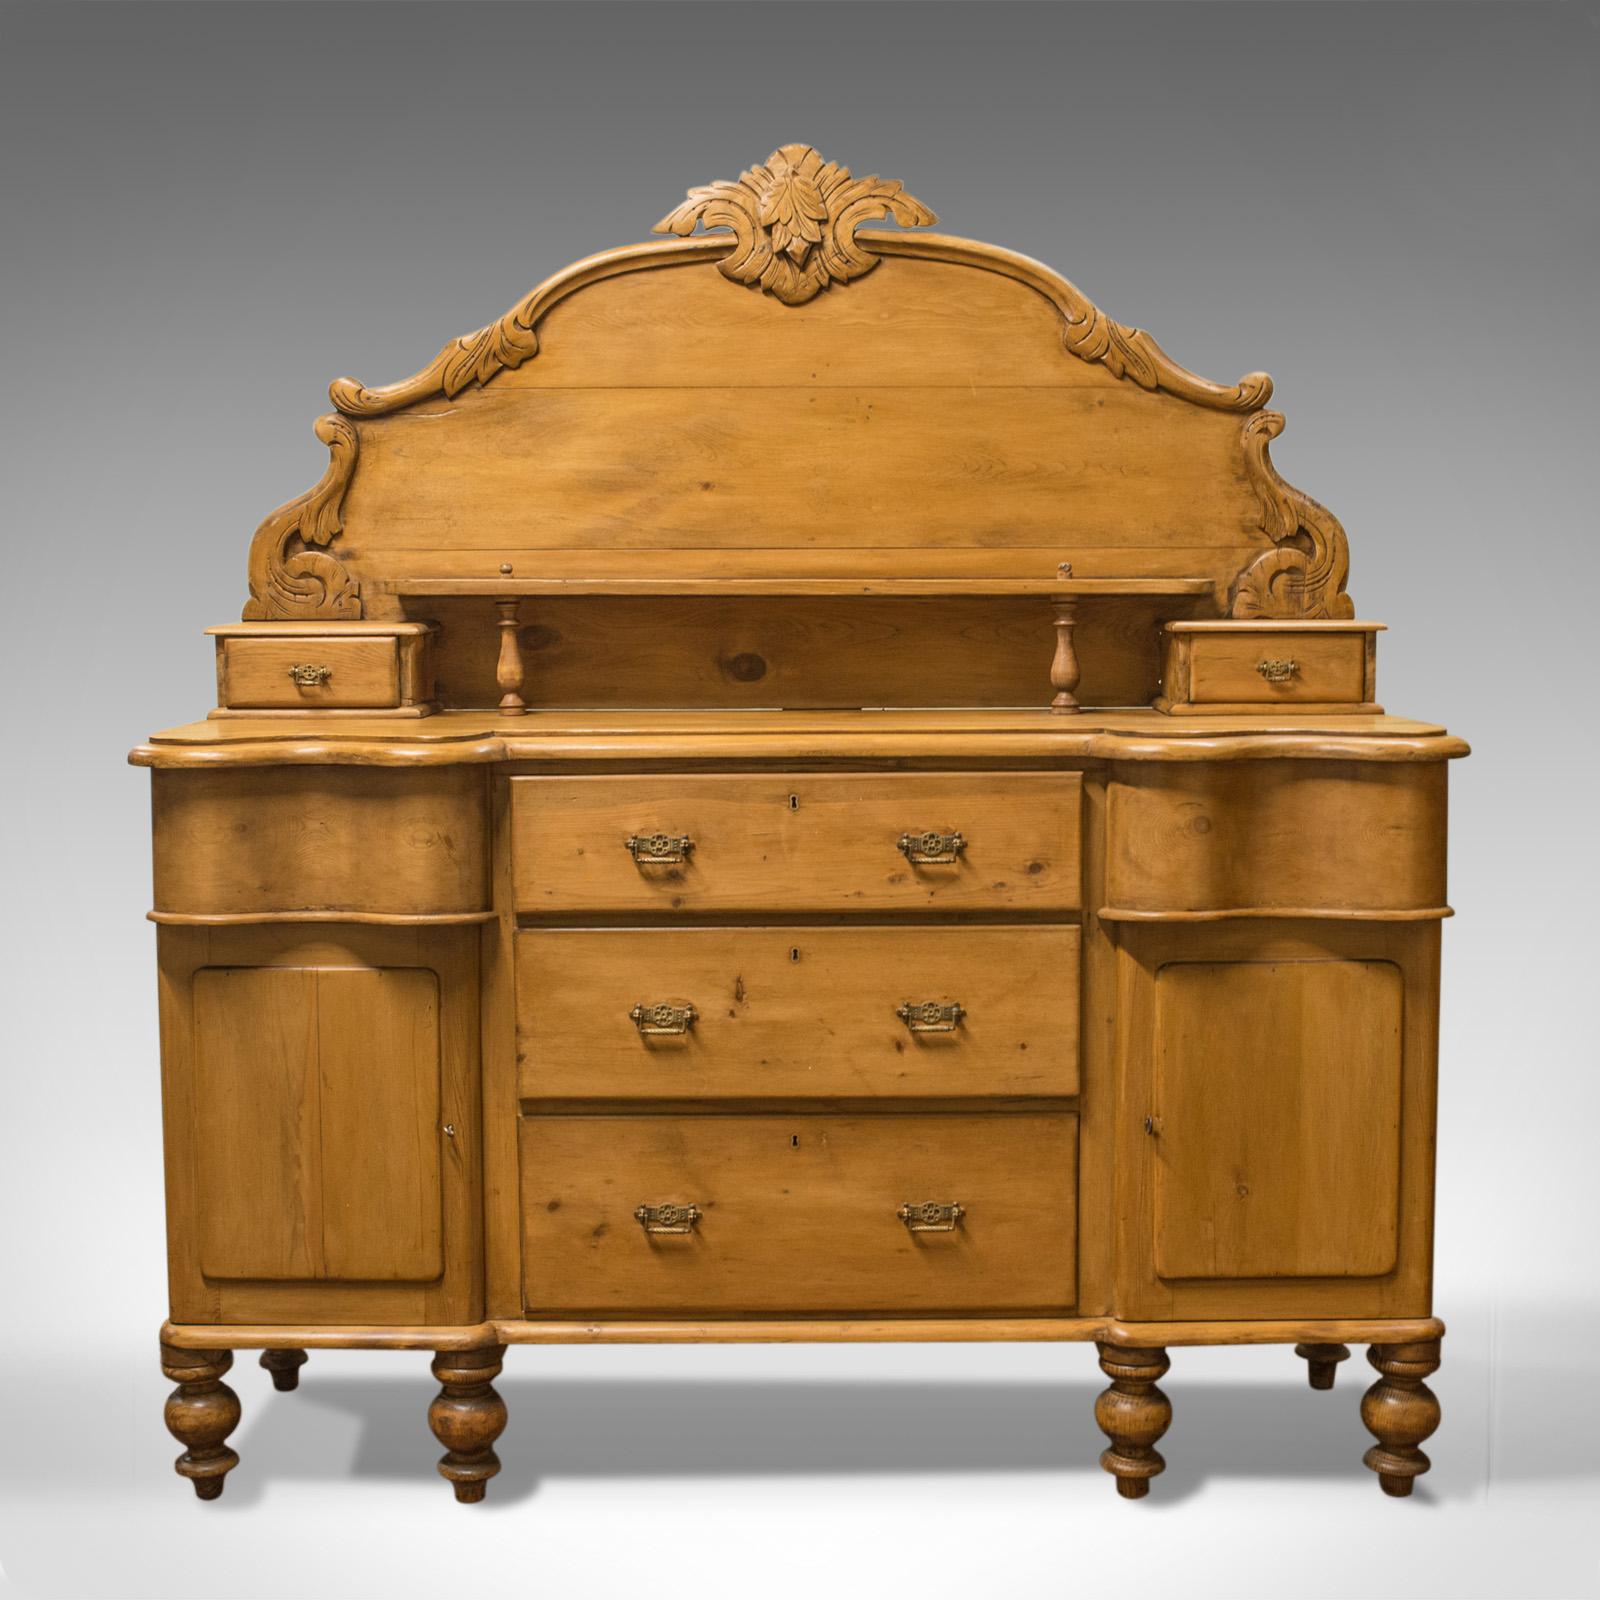 This is a large, antique pine sideboard. A French, late 19th century dining room buffet cabinet, circa 1900.

Crafted from generous stocks of antique pine
Displaying rich honey hues in a wax polished finish
Showing fine grain interest and a